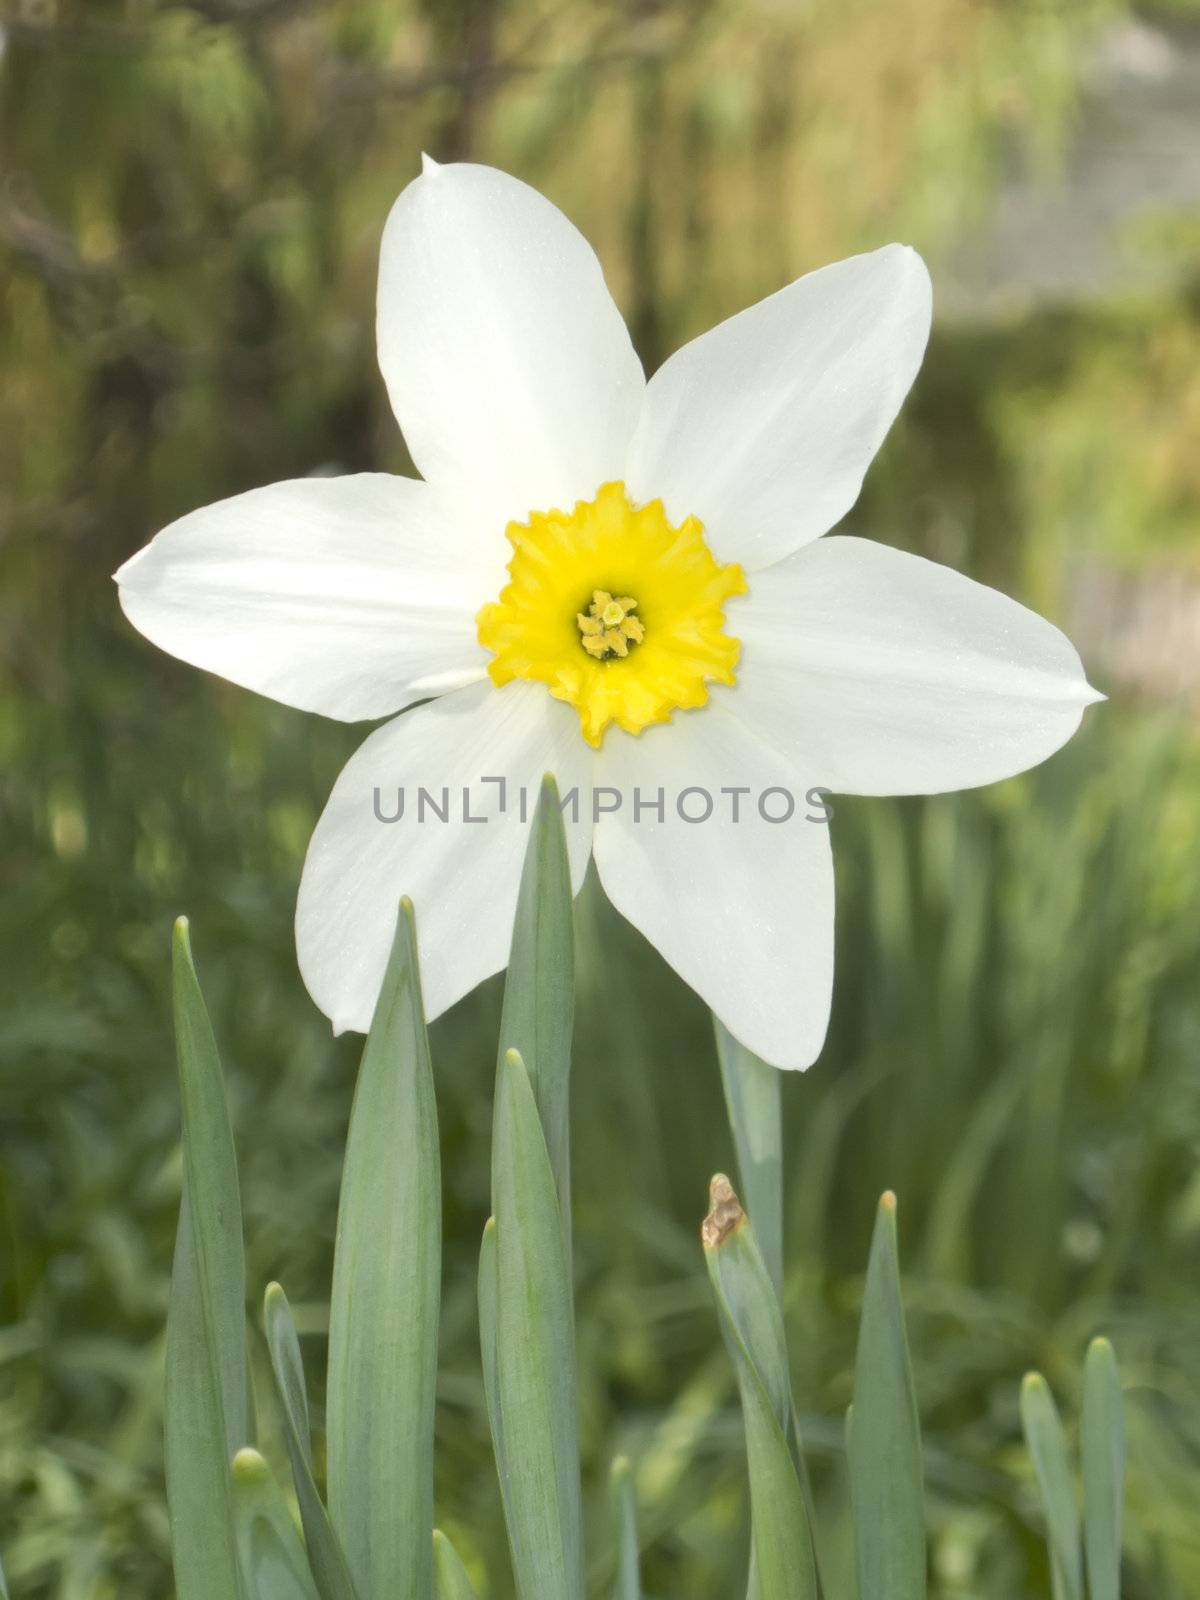 An image of a white daffodil in the garden